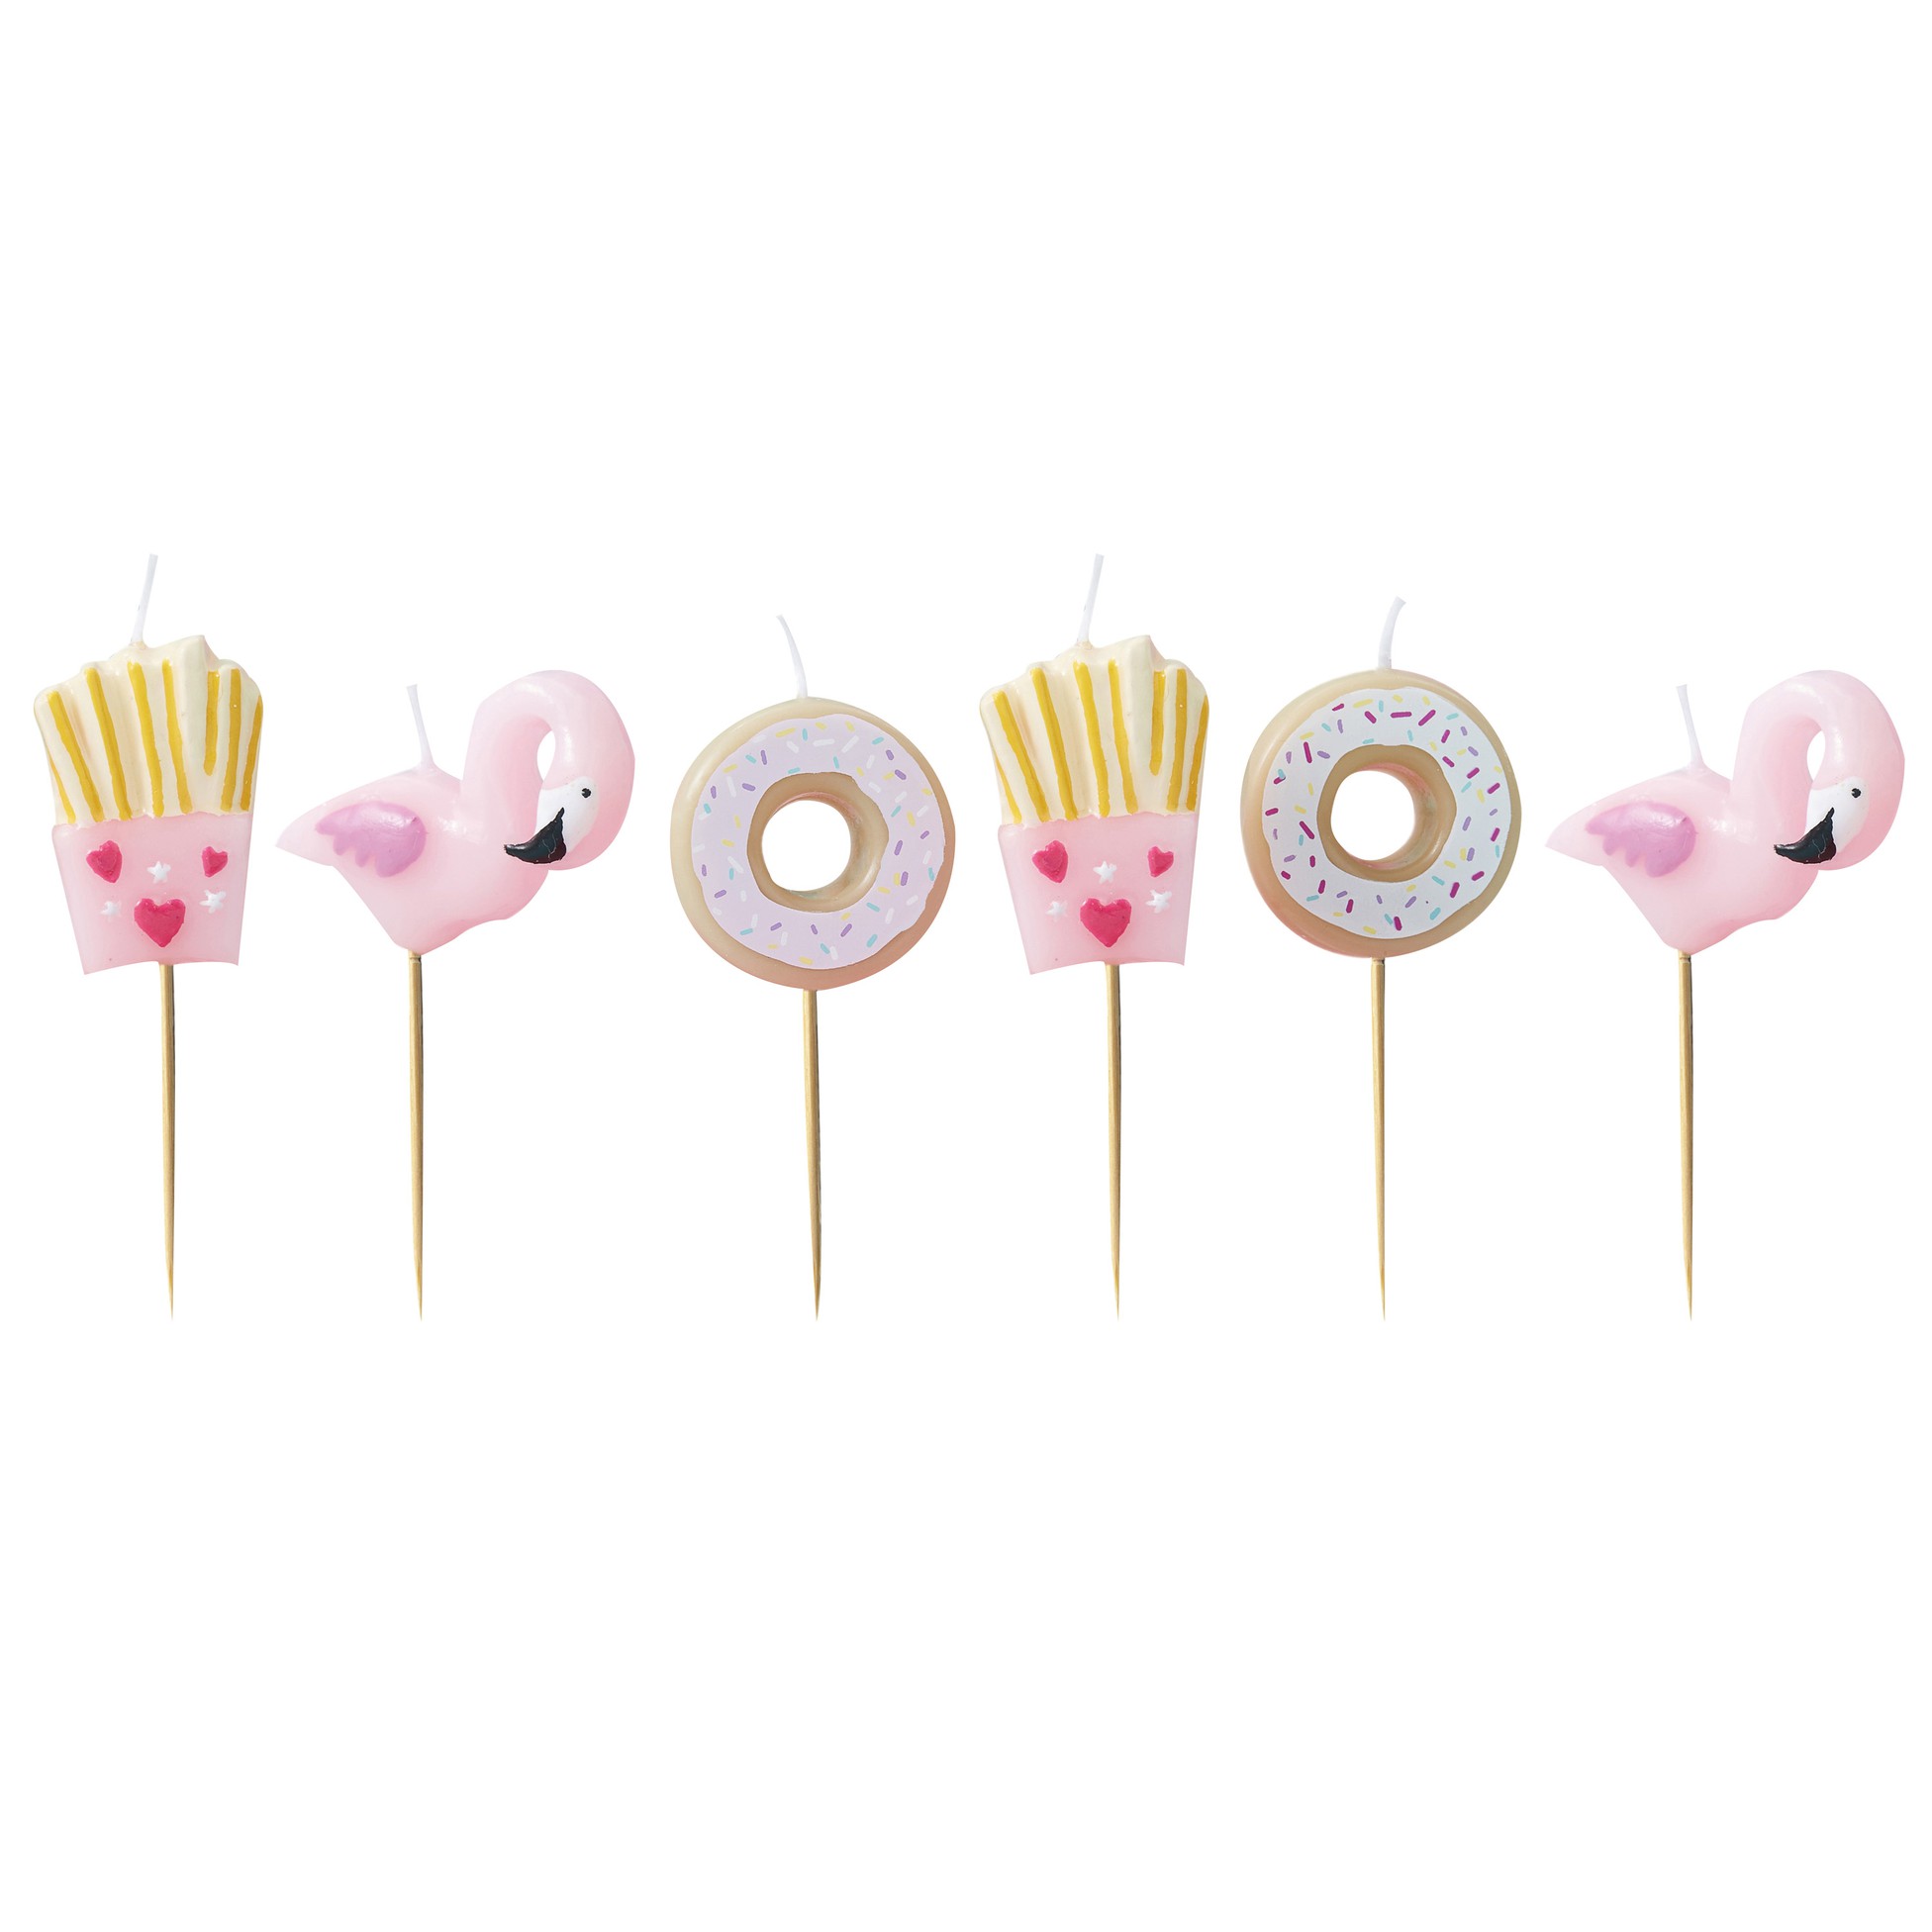 Ginger Ray Fries Donut and Flamingo Shaped Candles Kit